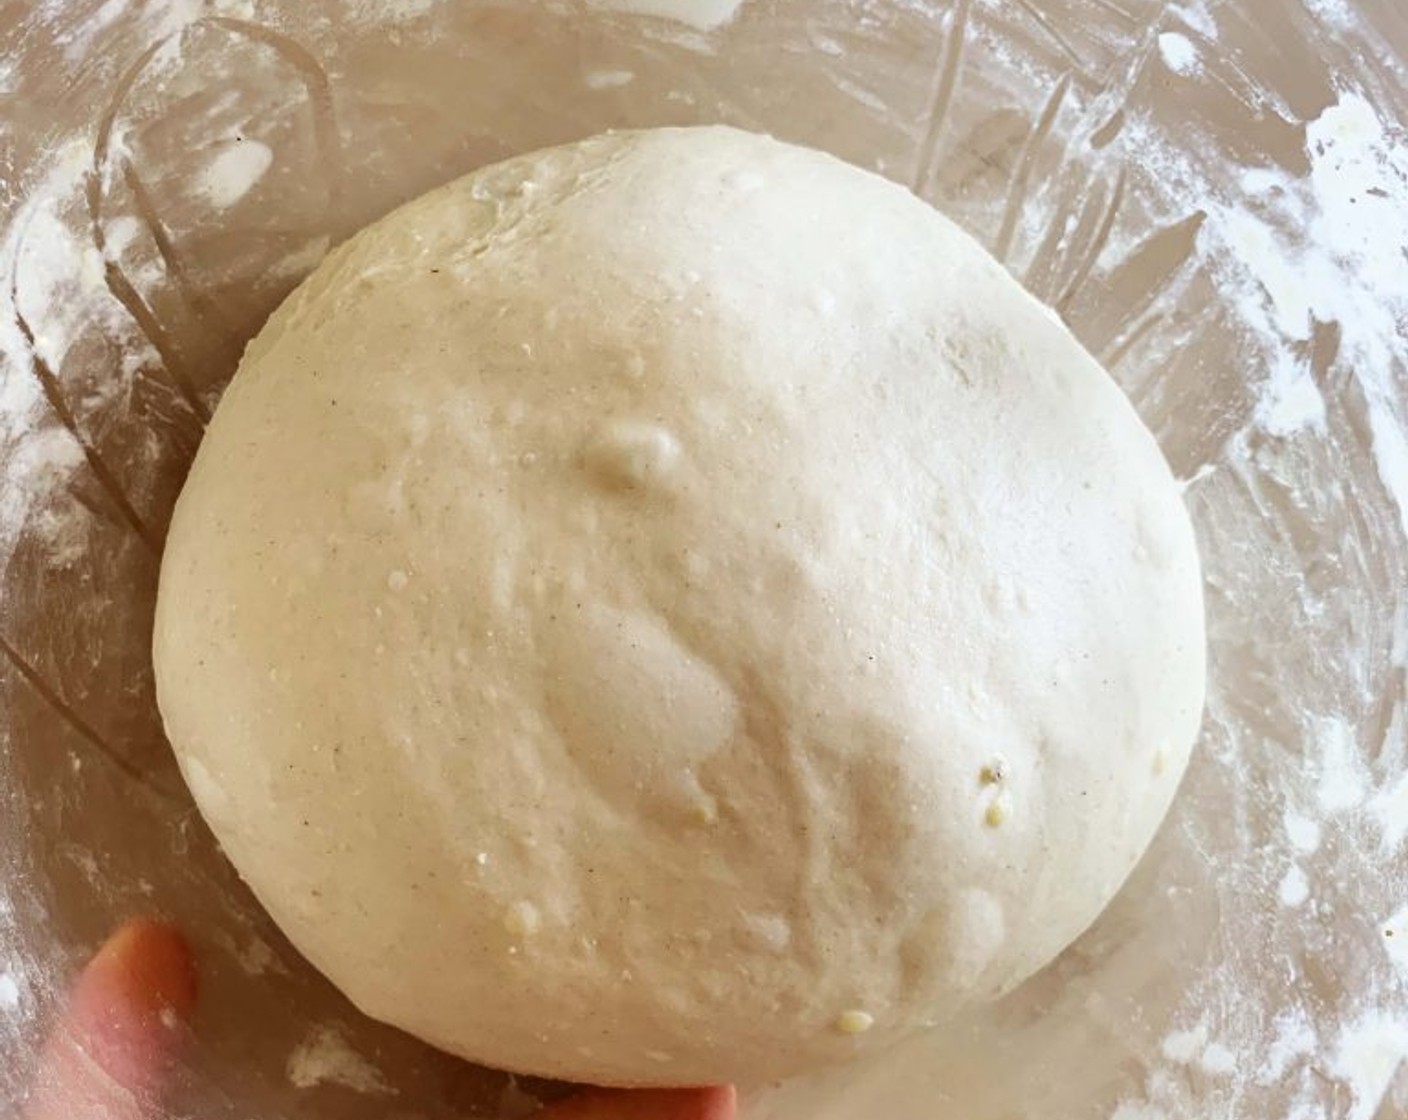 step 3 Flip the dough onto a wet surface (just spray some water) and with wet hands do 3 rounds of slap and fold (each time just do 3 folds, no more), allowing the dough to rest for 20 minutes between each round.